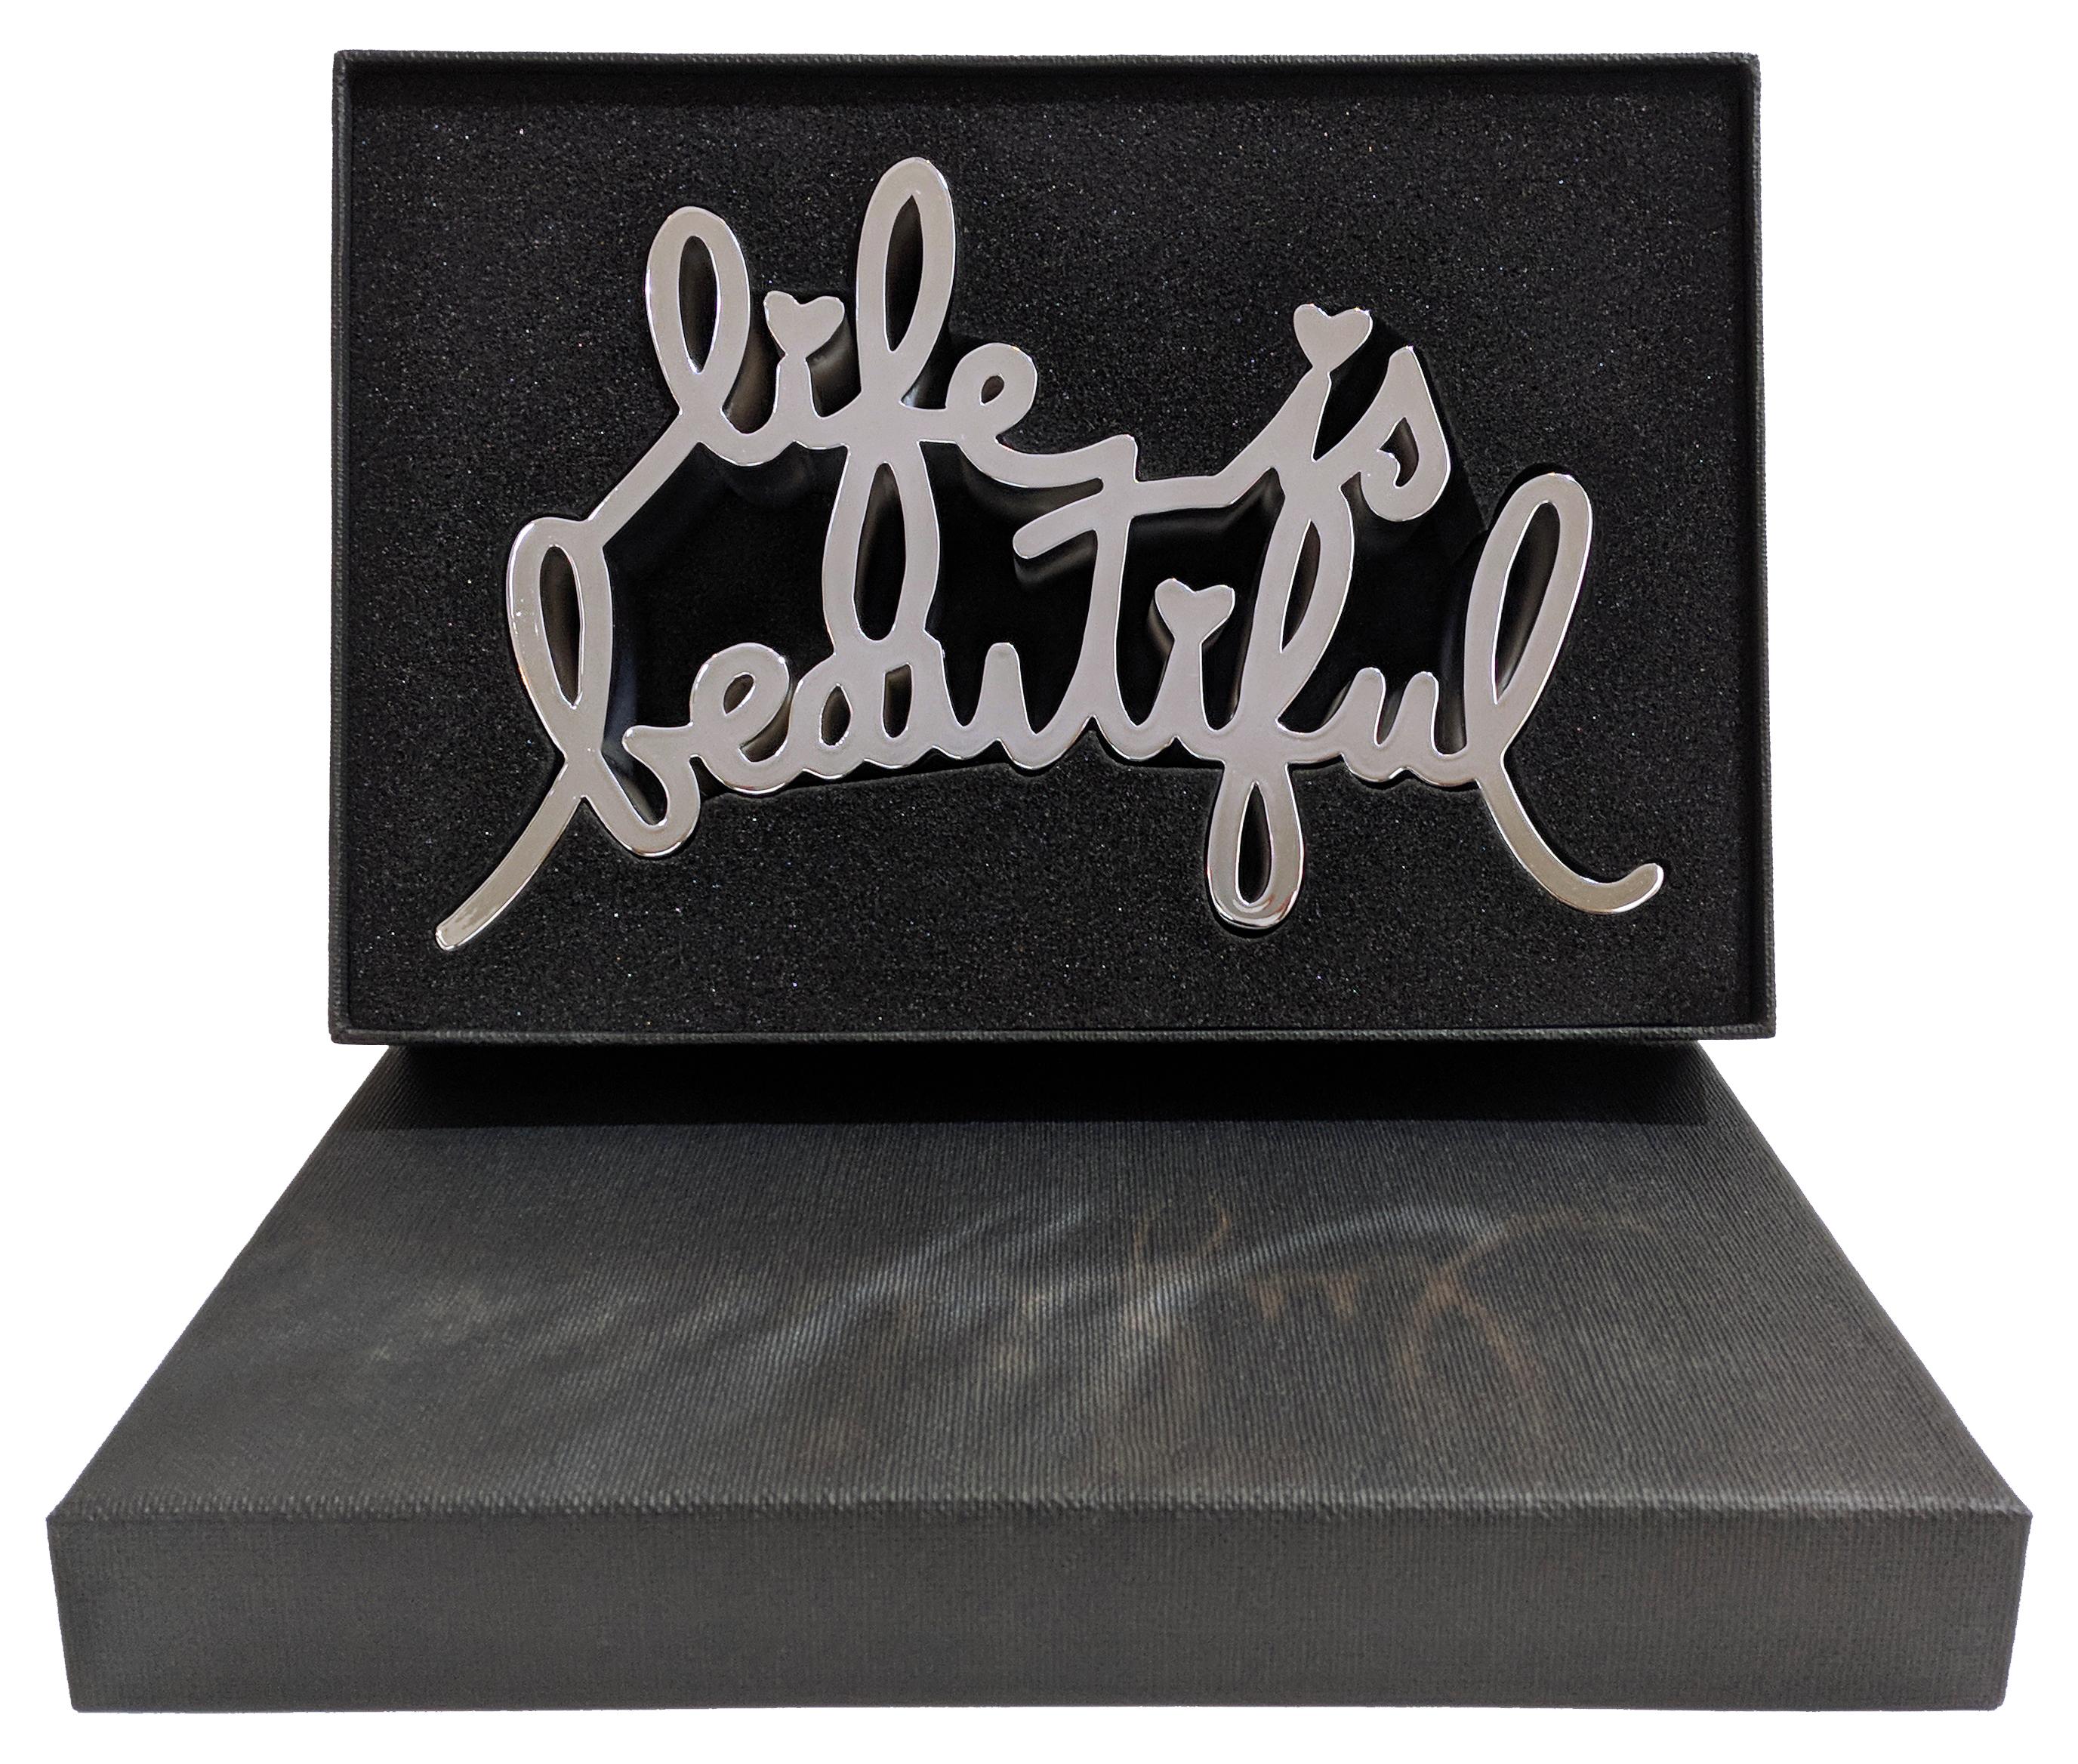 LIFE IS BEAUTIFUL (HARD CANDY CHROME) - Gray Figurative Sculpture by Mr Brainwash